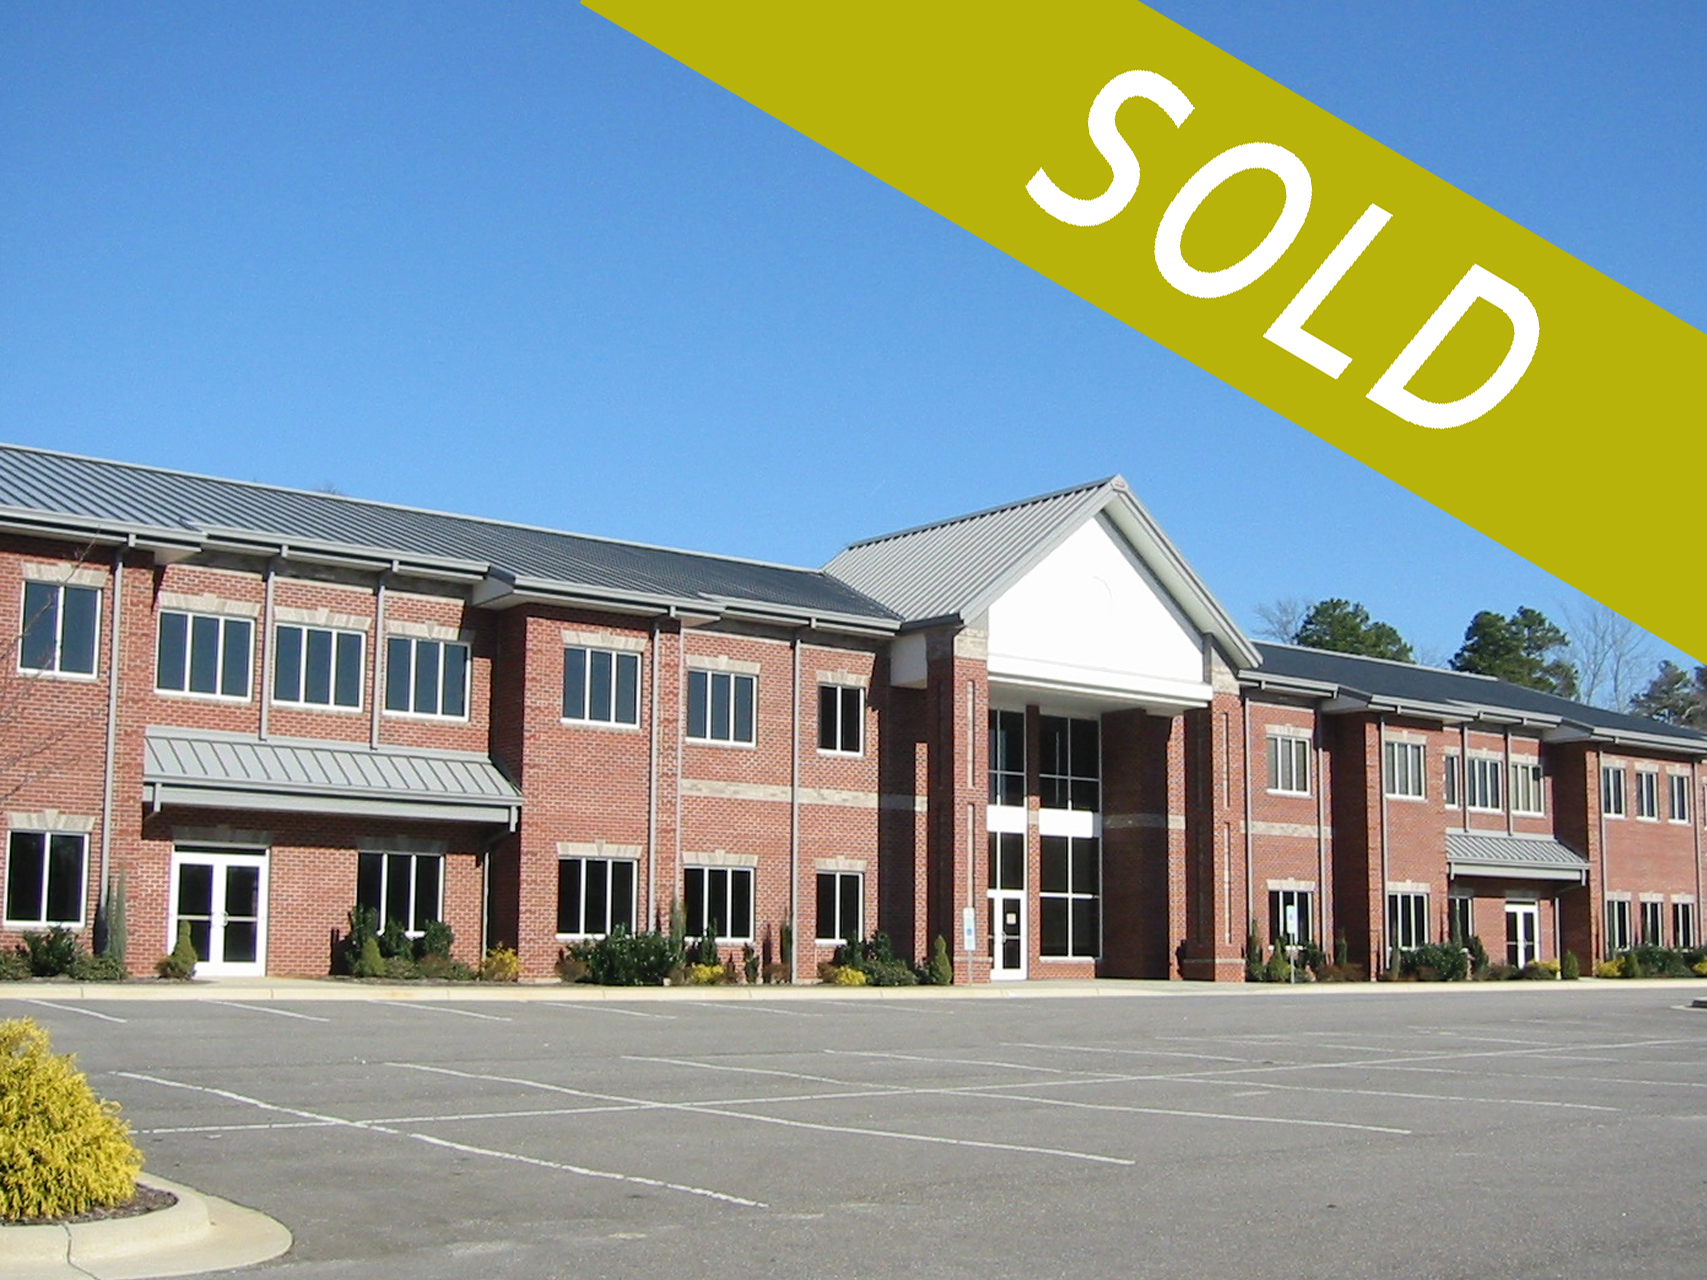 Commercial Office Space for Sale Lakeside Commons Shelby NC